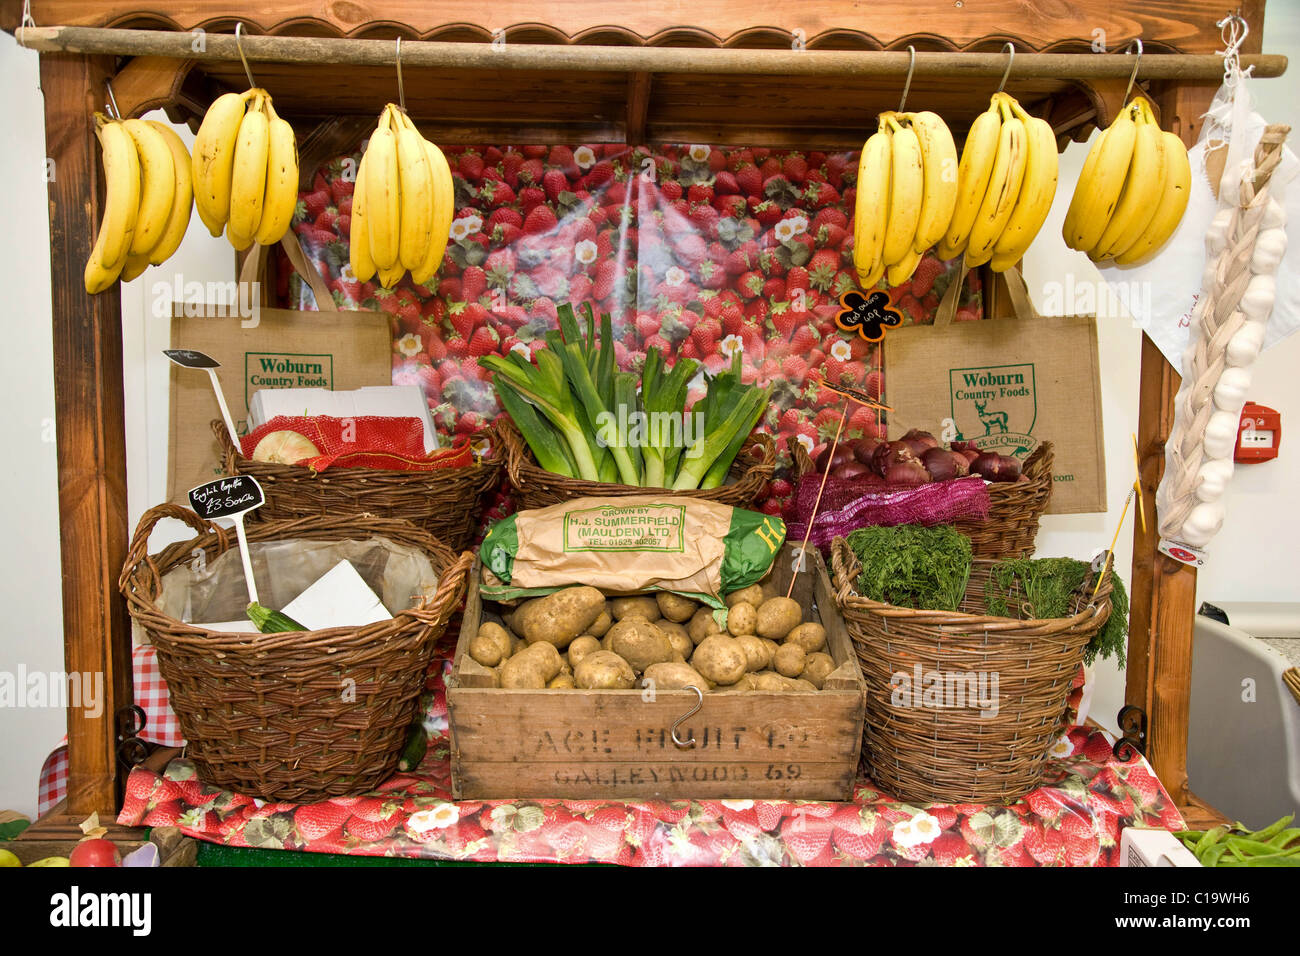 Fruit and veg on display in a farm shop Stock Photo